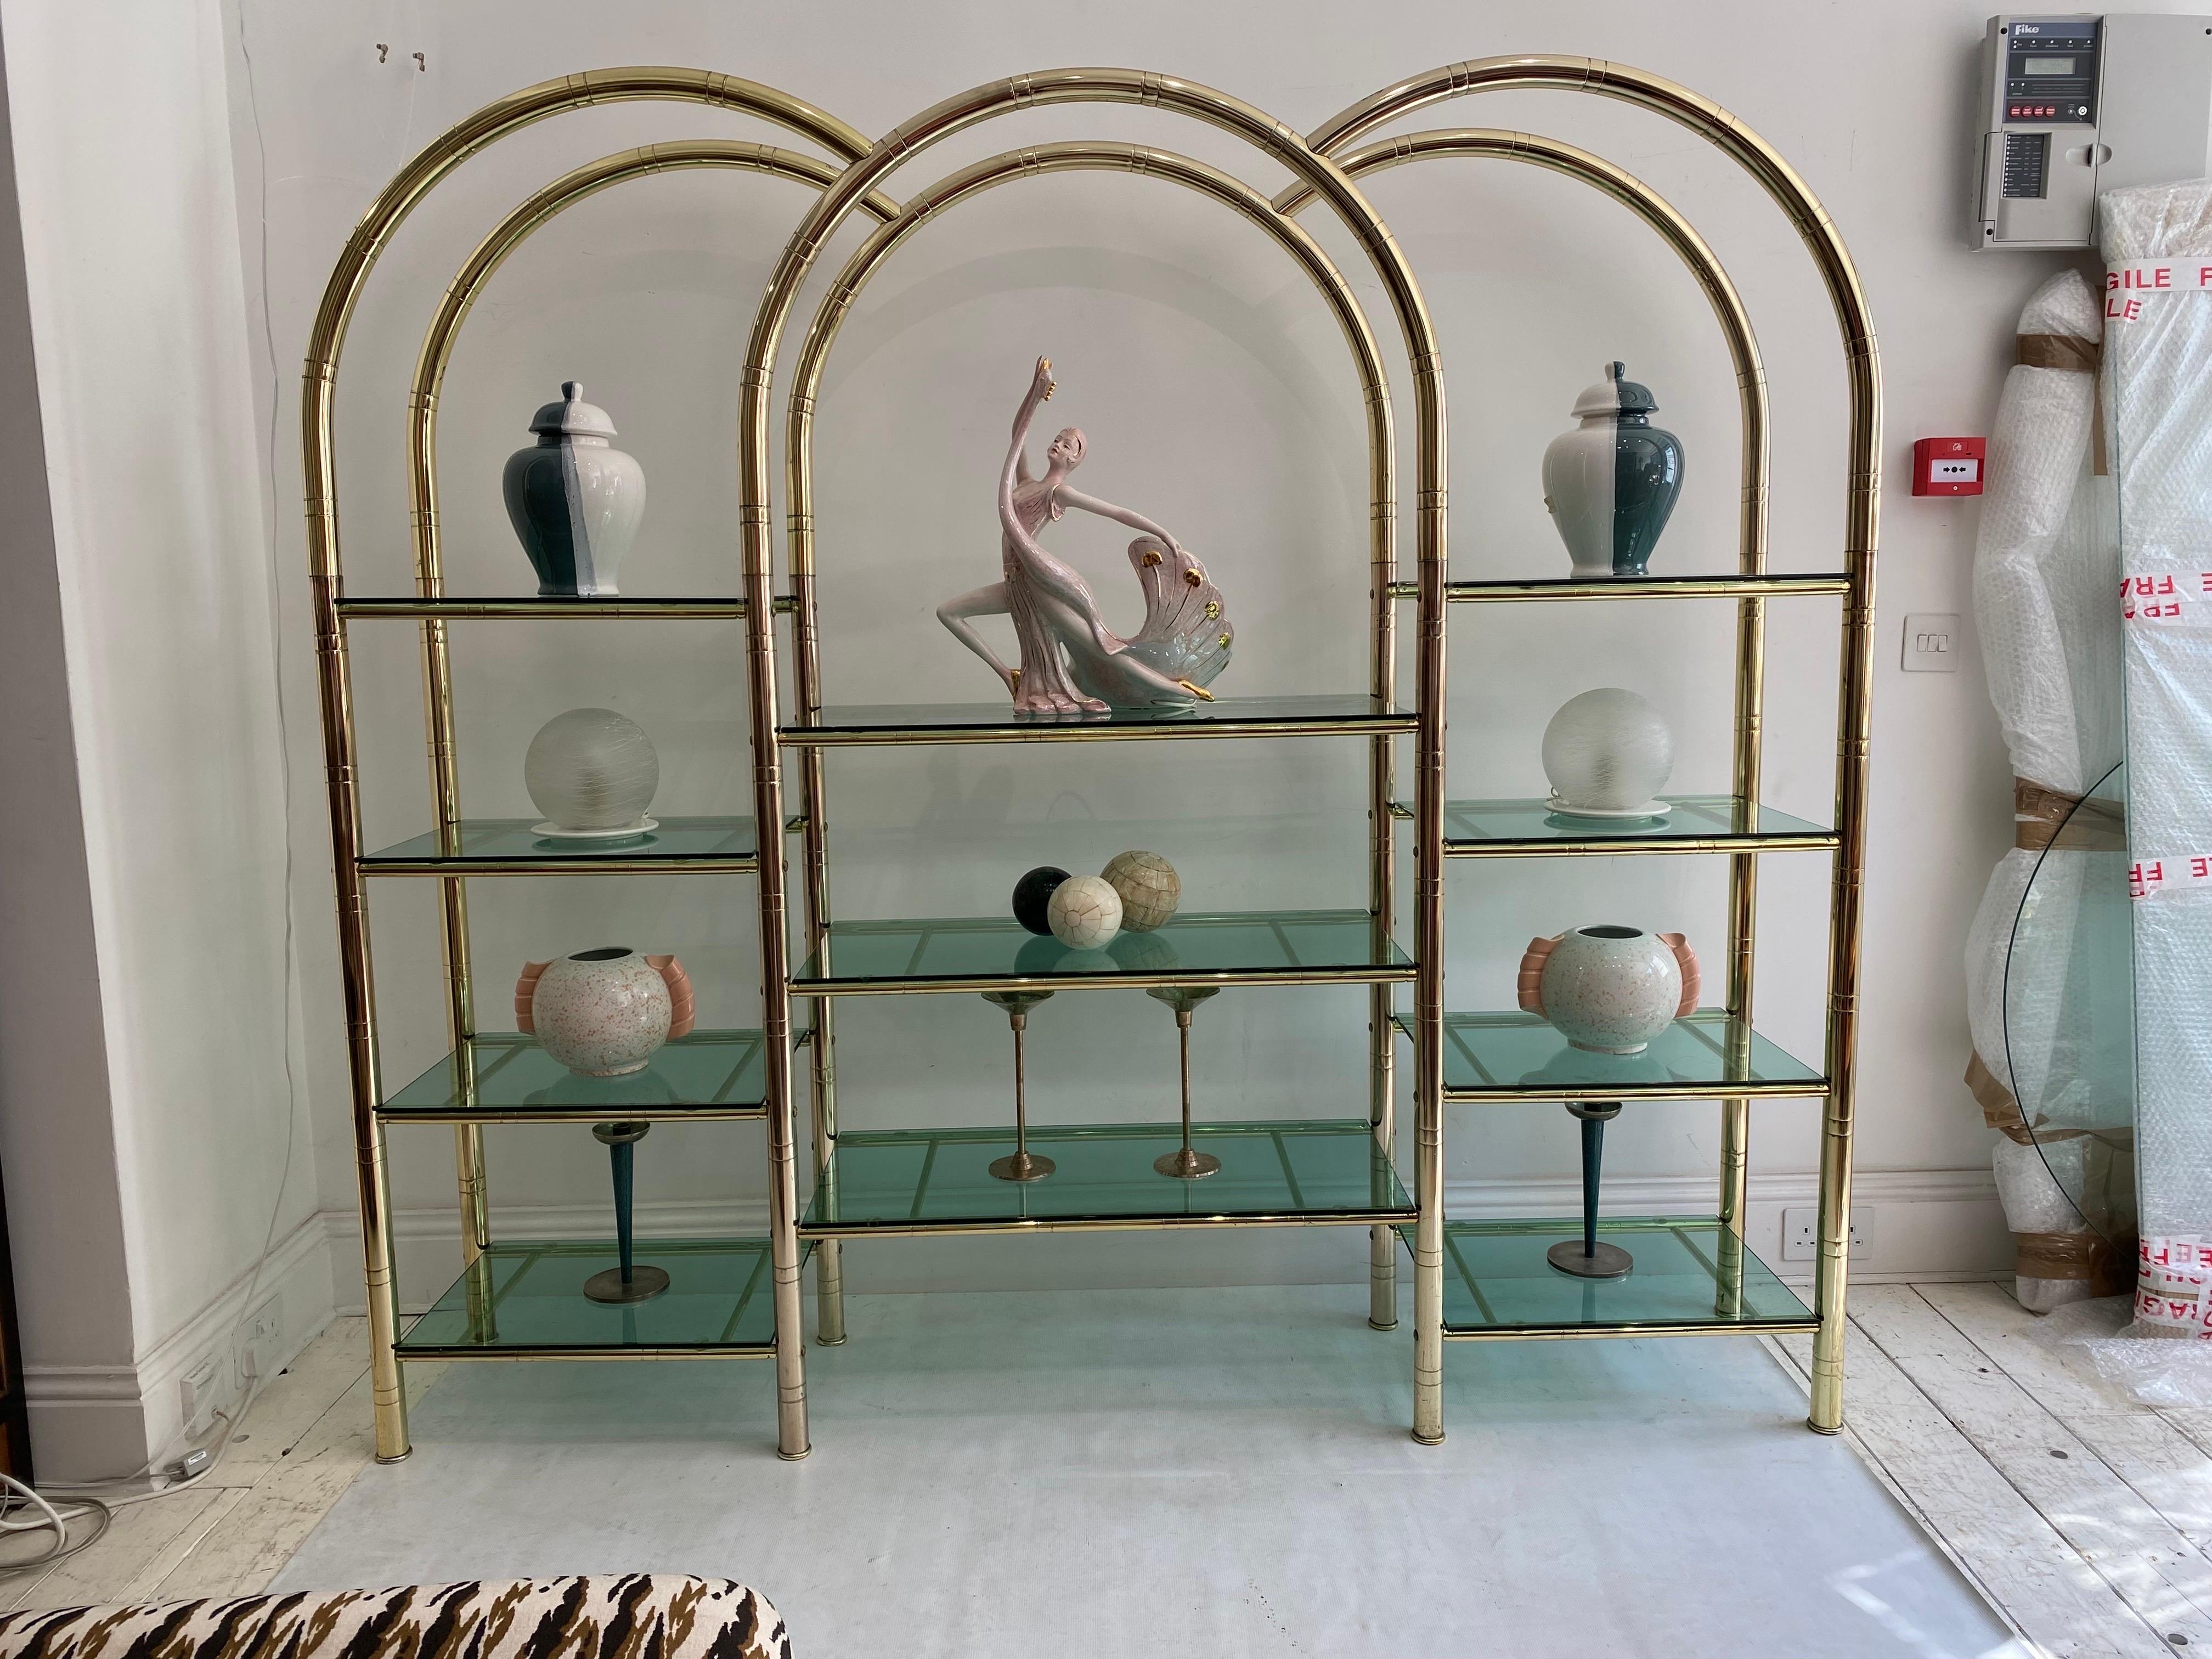 An amazing late 1970s early 1980s Italian display unit etagere in brass plated faux bamboo and the most beautiful aqua green glass! All glass shelves are original with its characteristic vintage edge glass finish in a unique and large arched shape,